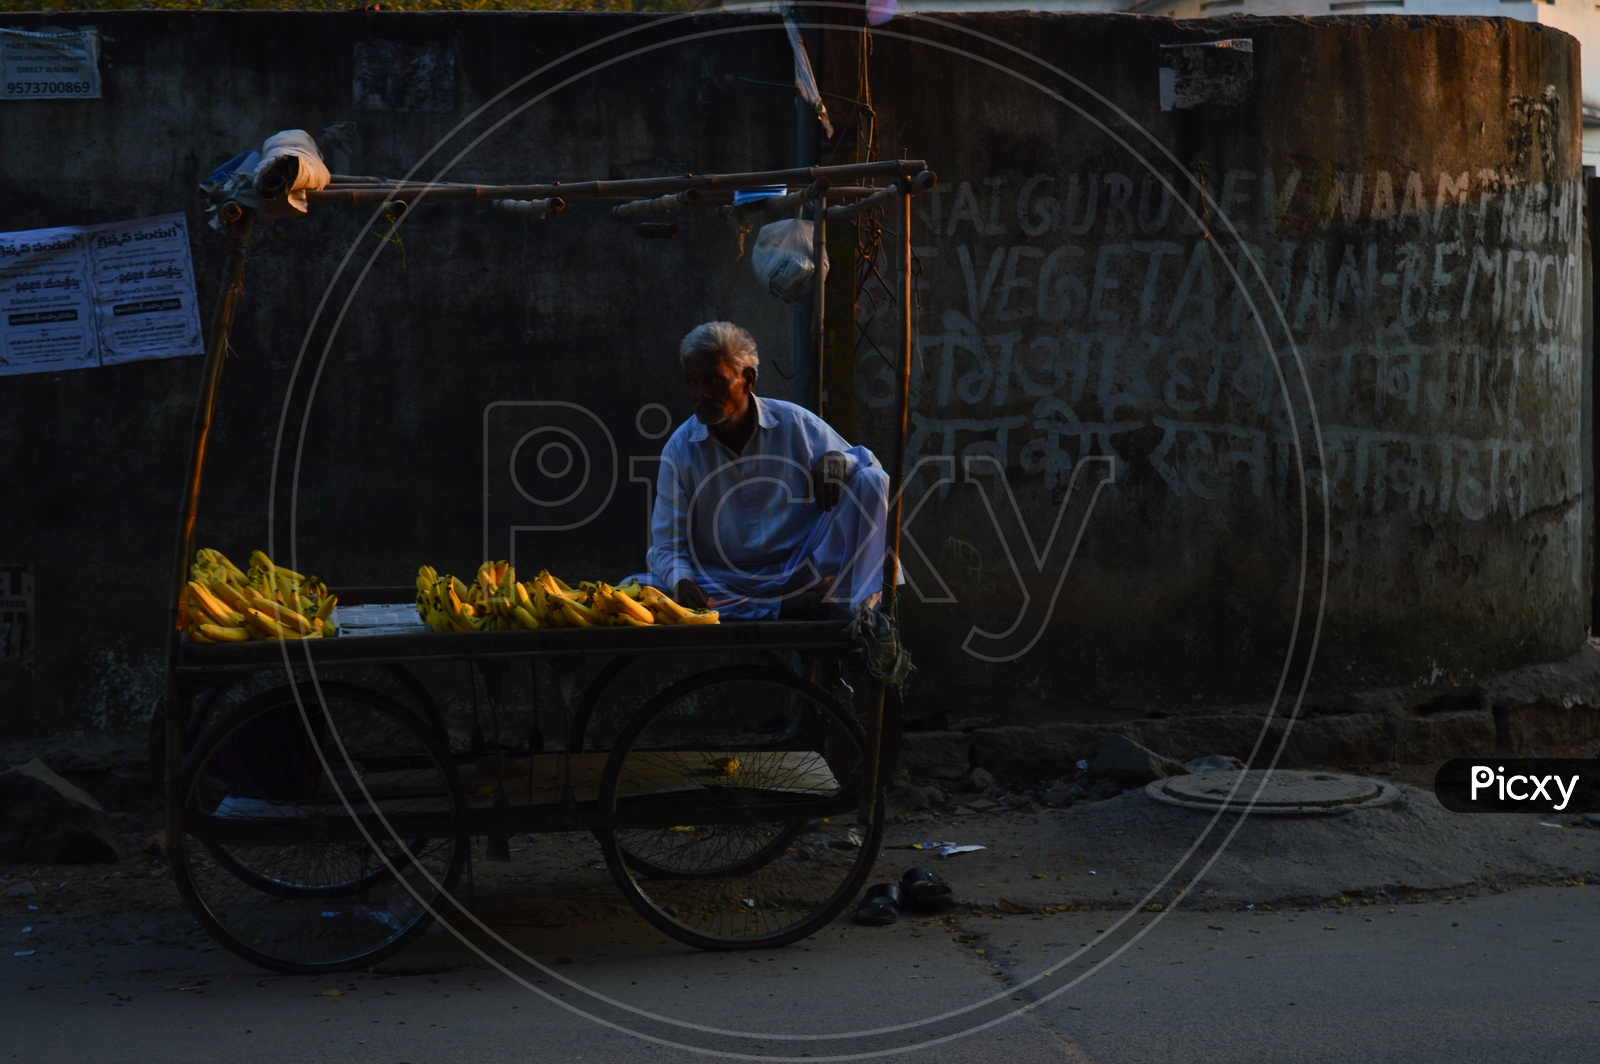 An Old Man Selling Bananas on Road Sides